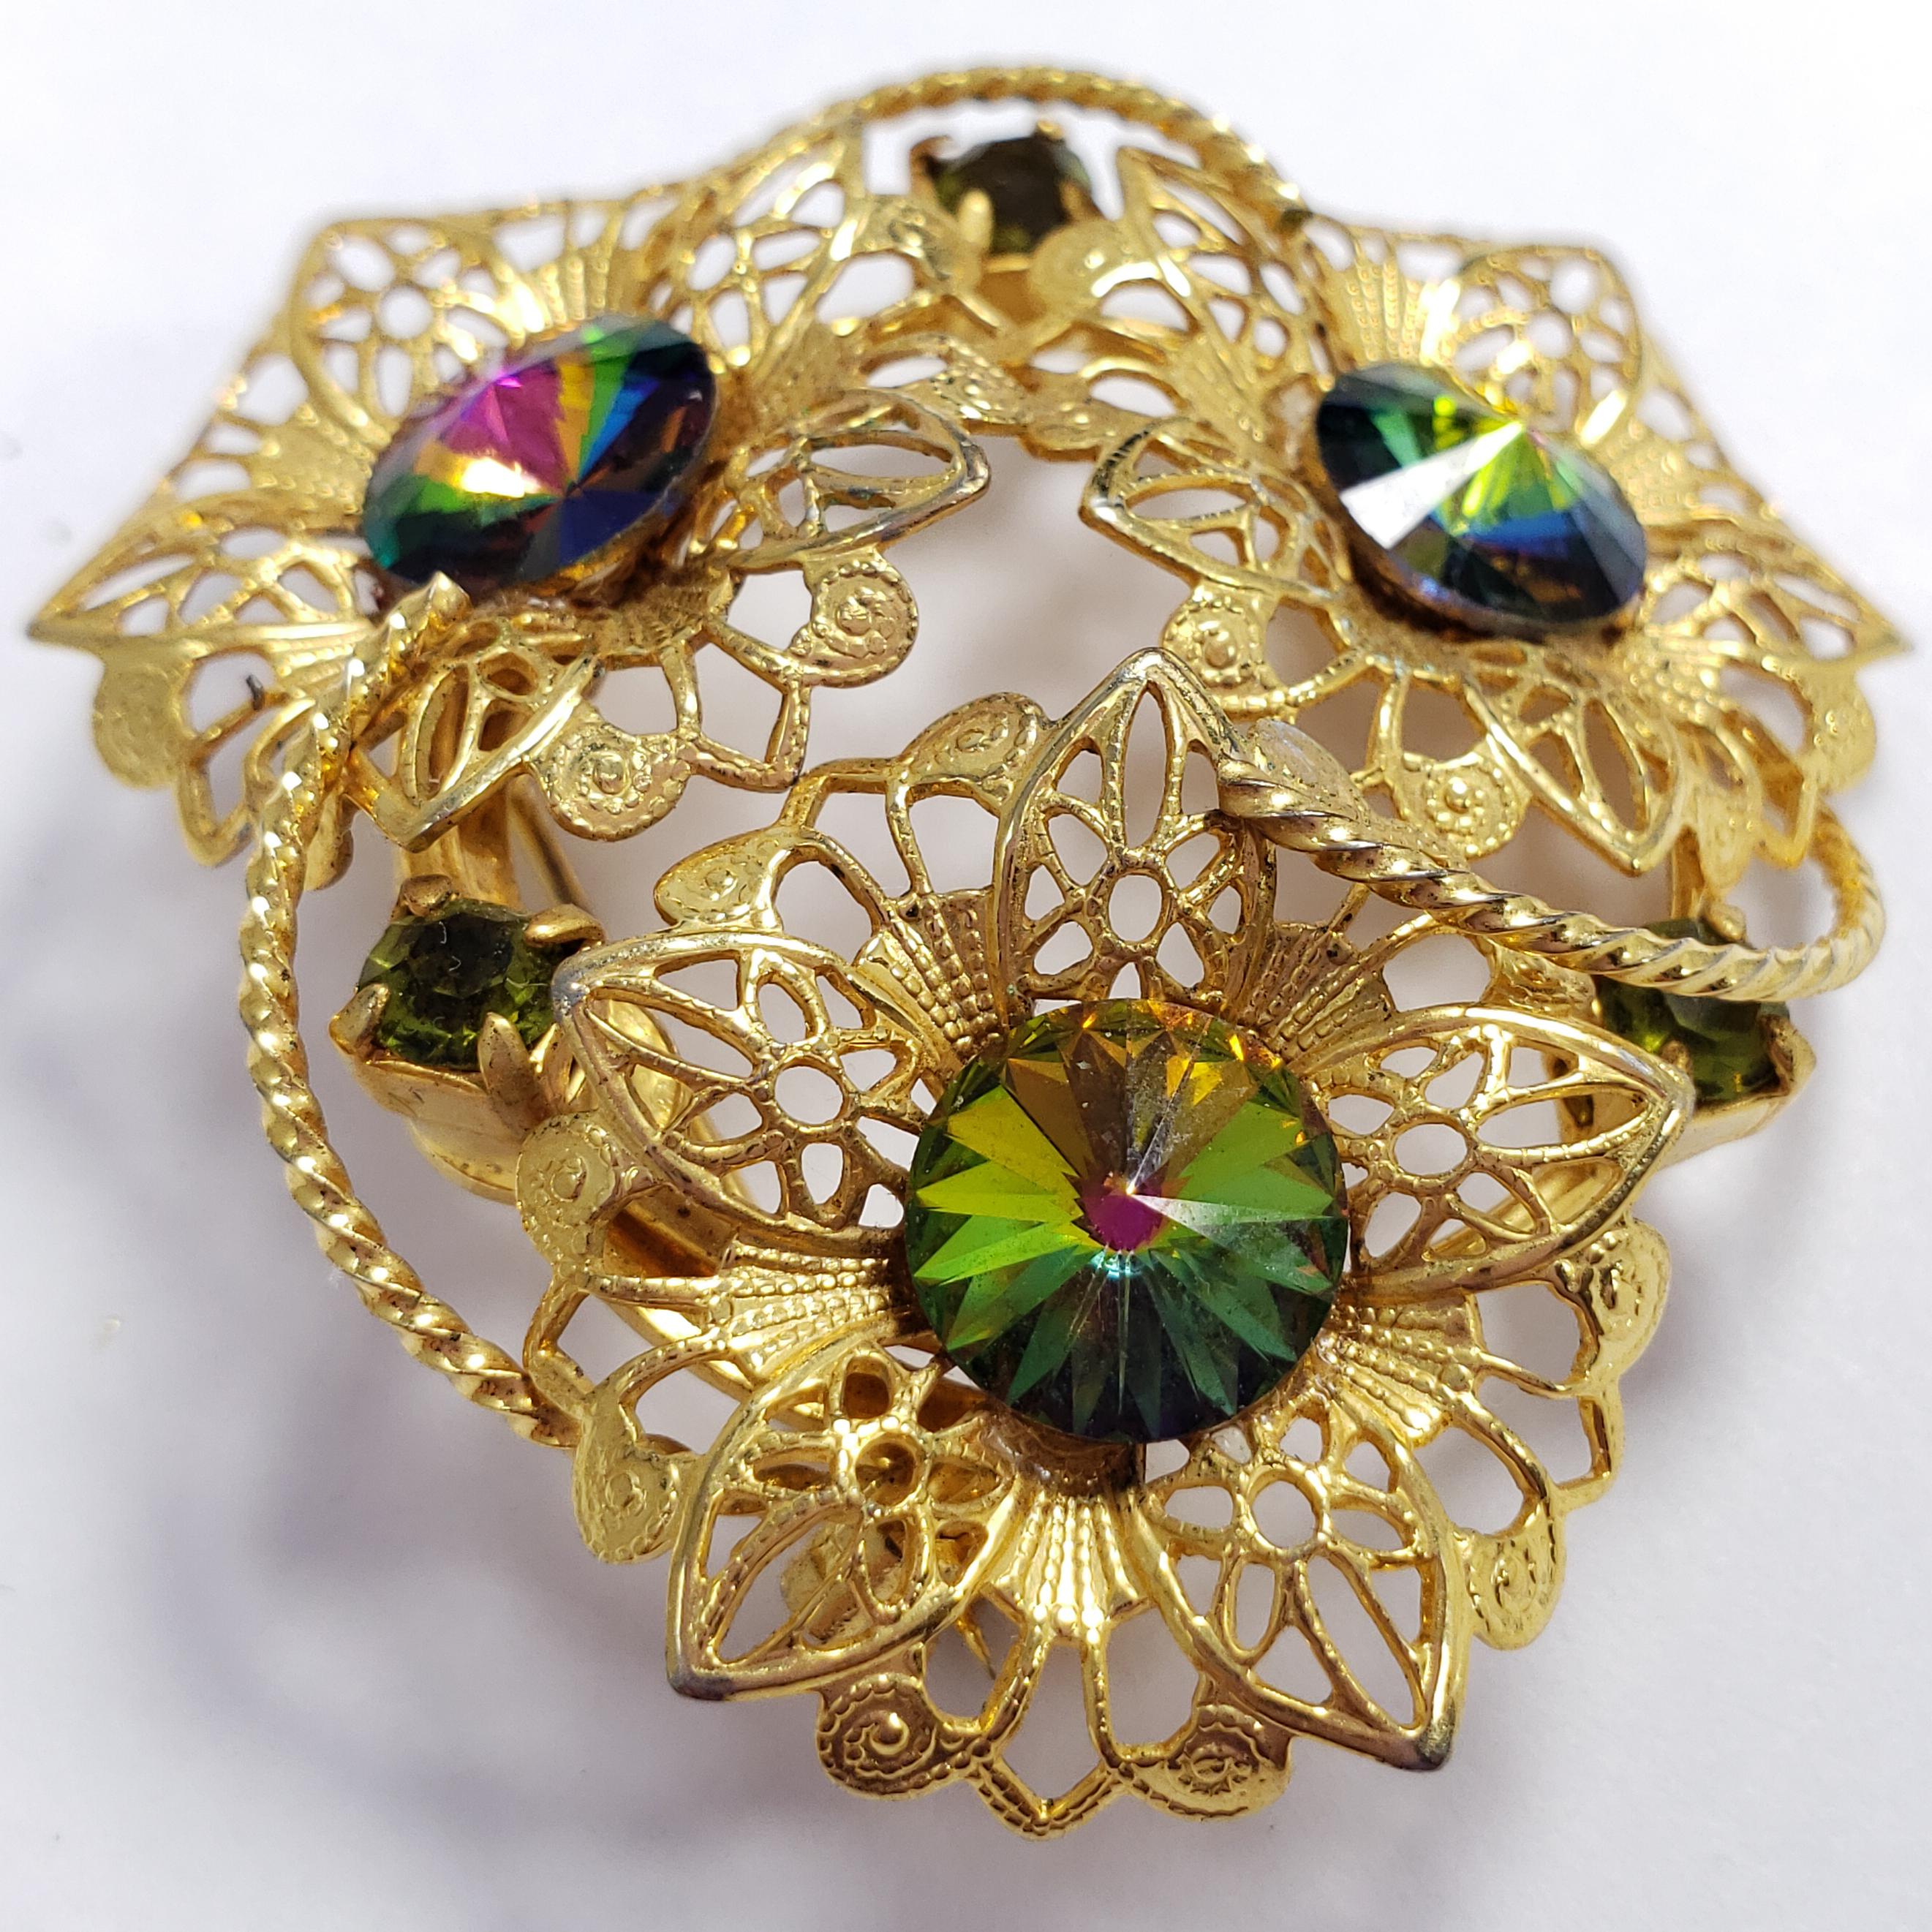 An art nouveau style vintage pin brooch, featuring three watermelon rivoli-cut crystals in mesmerizing colors, set on a floral-themed setting. An extravagant accessory!